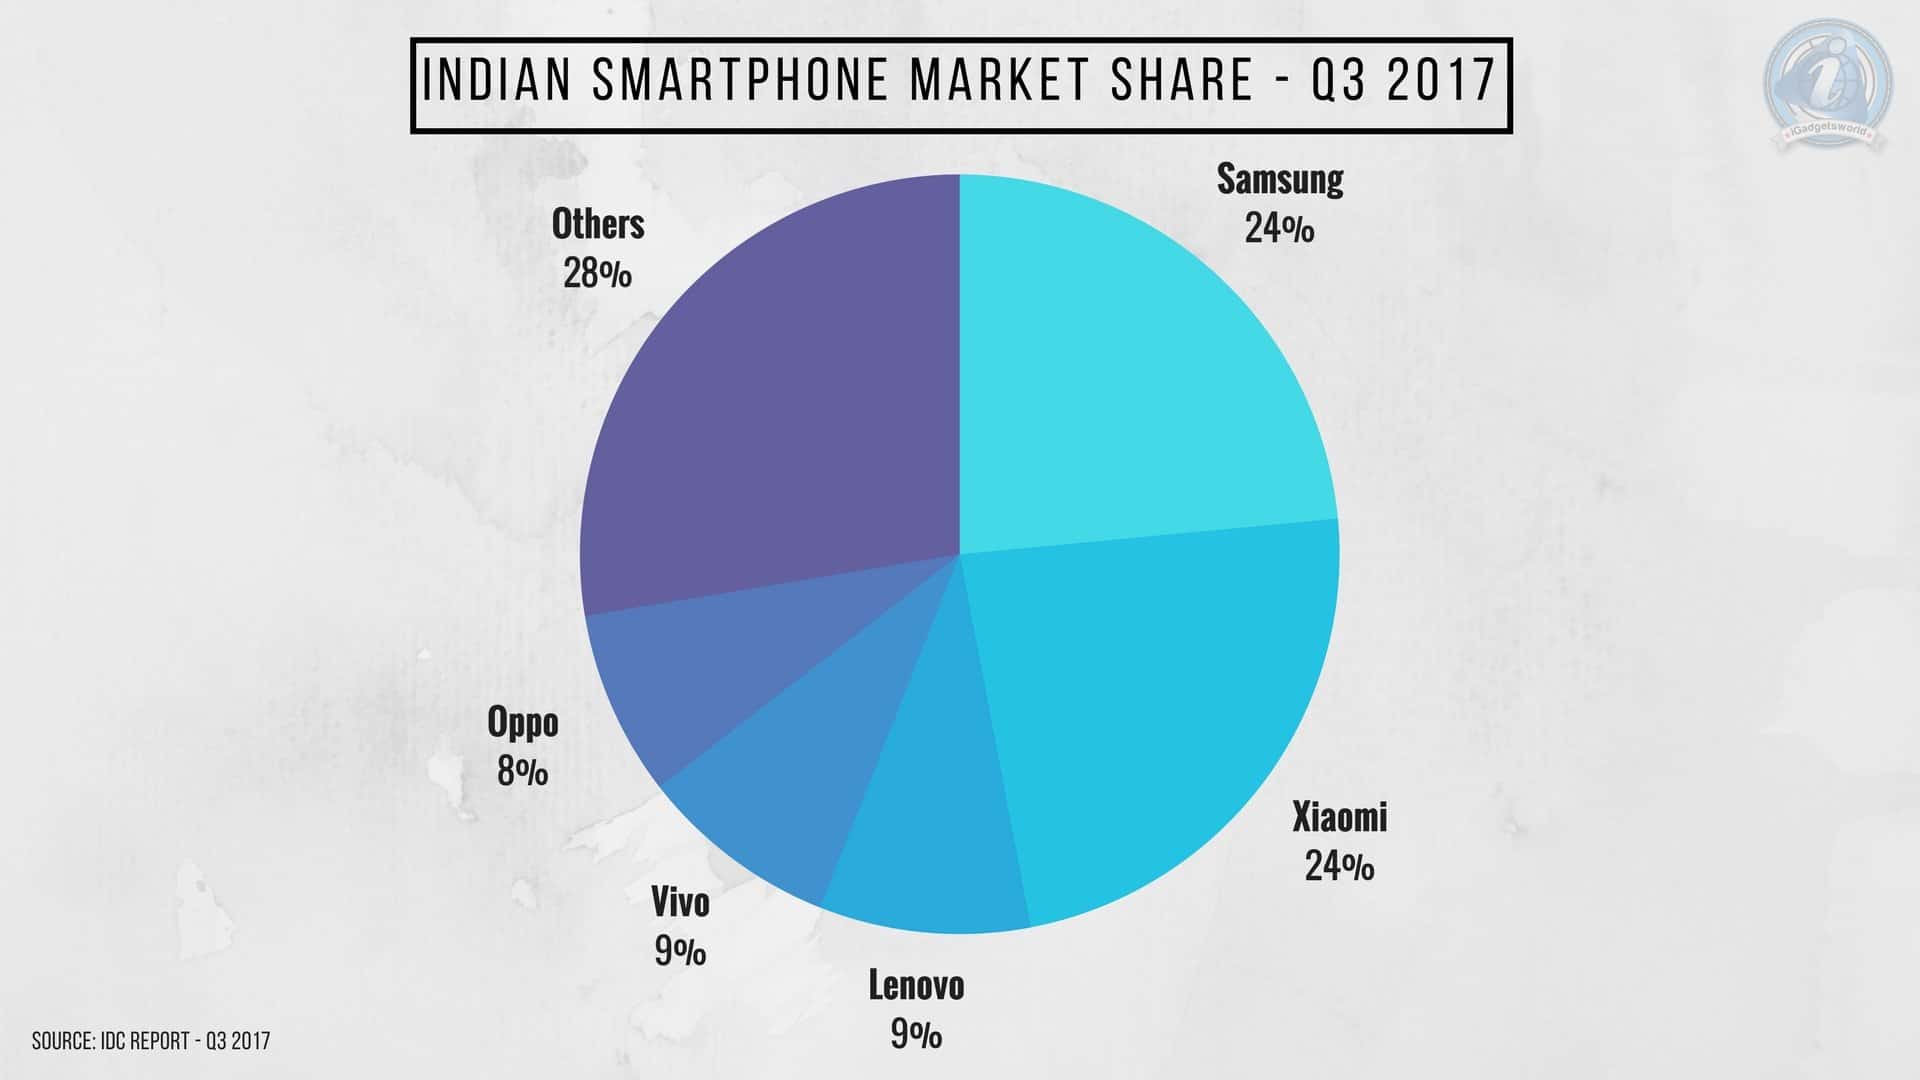 For the First Time Ever, Xiaomi is the No. 1 Smartphone Brand in India - Q3 2017 | IDC Report - 5